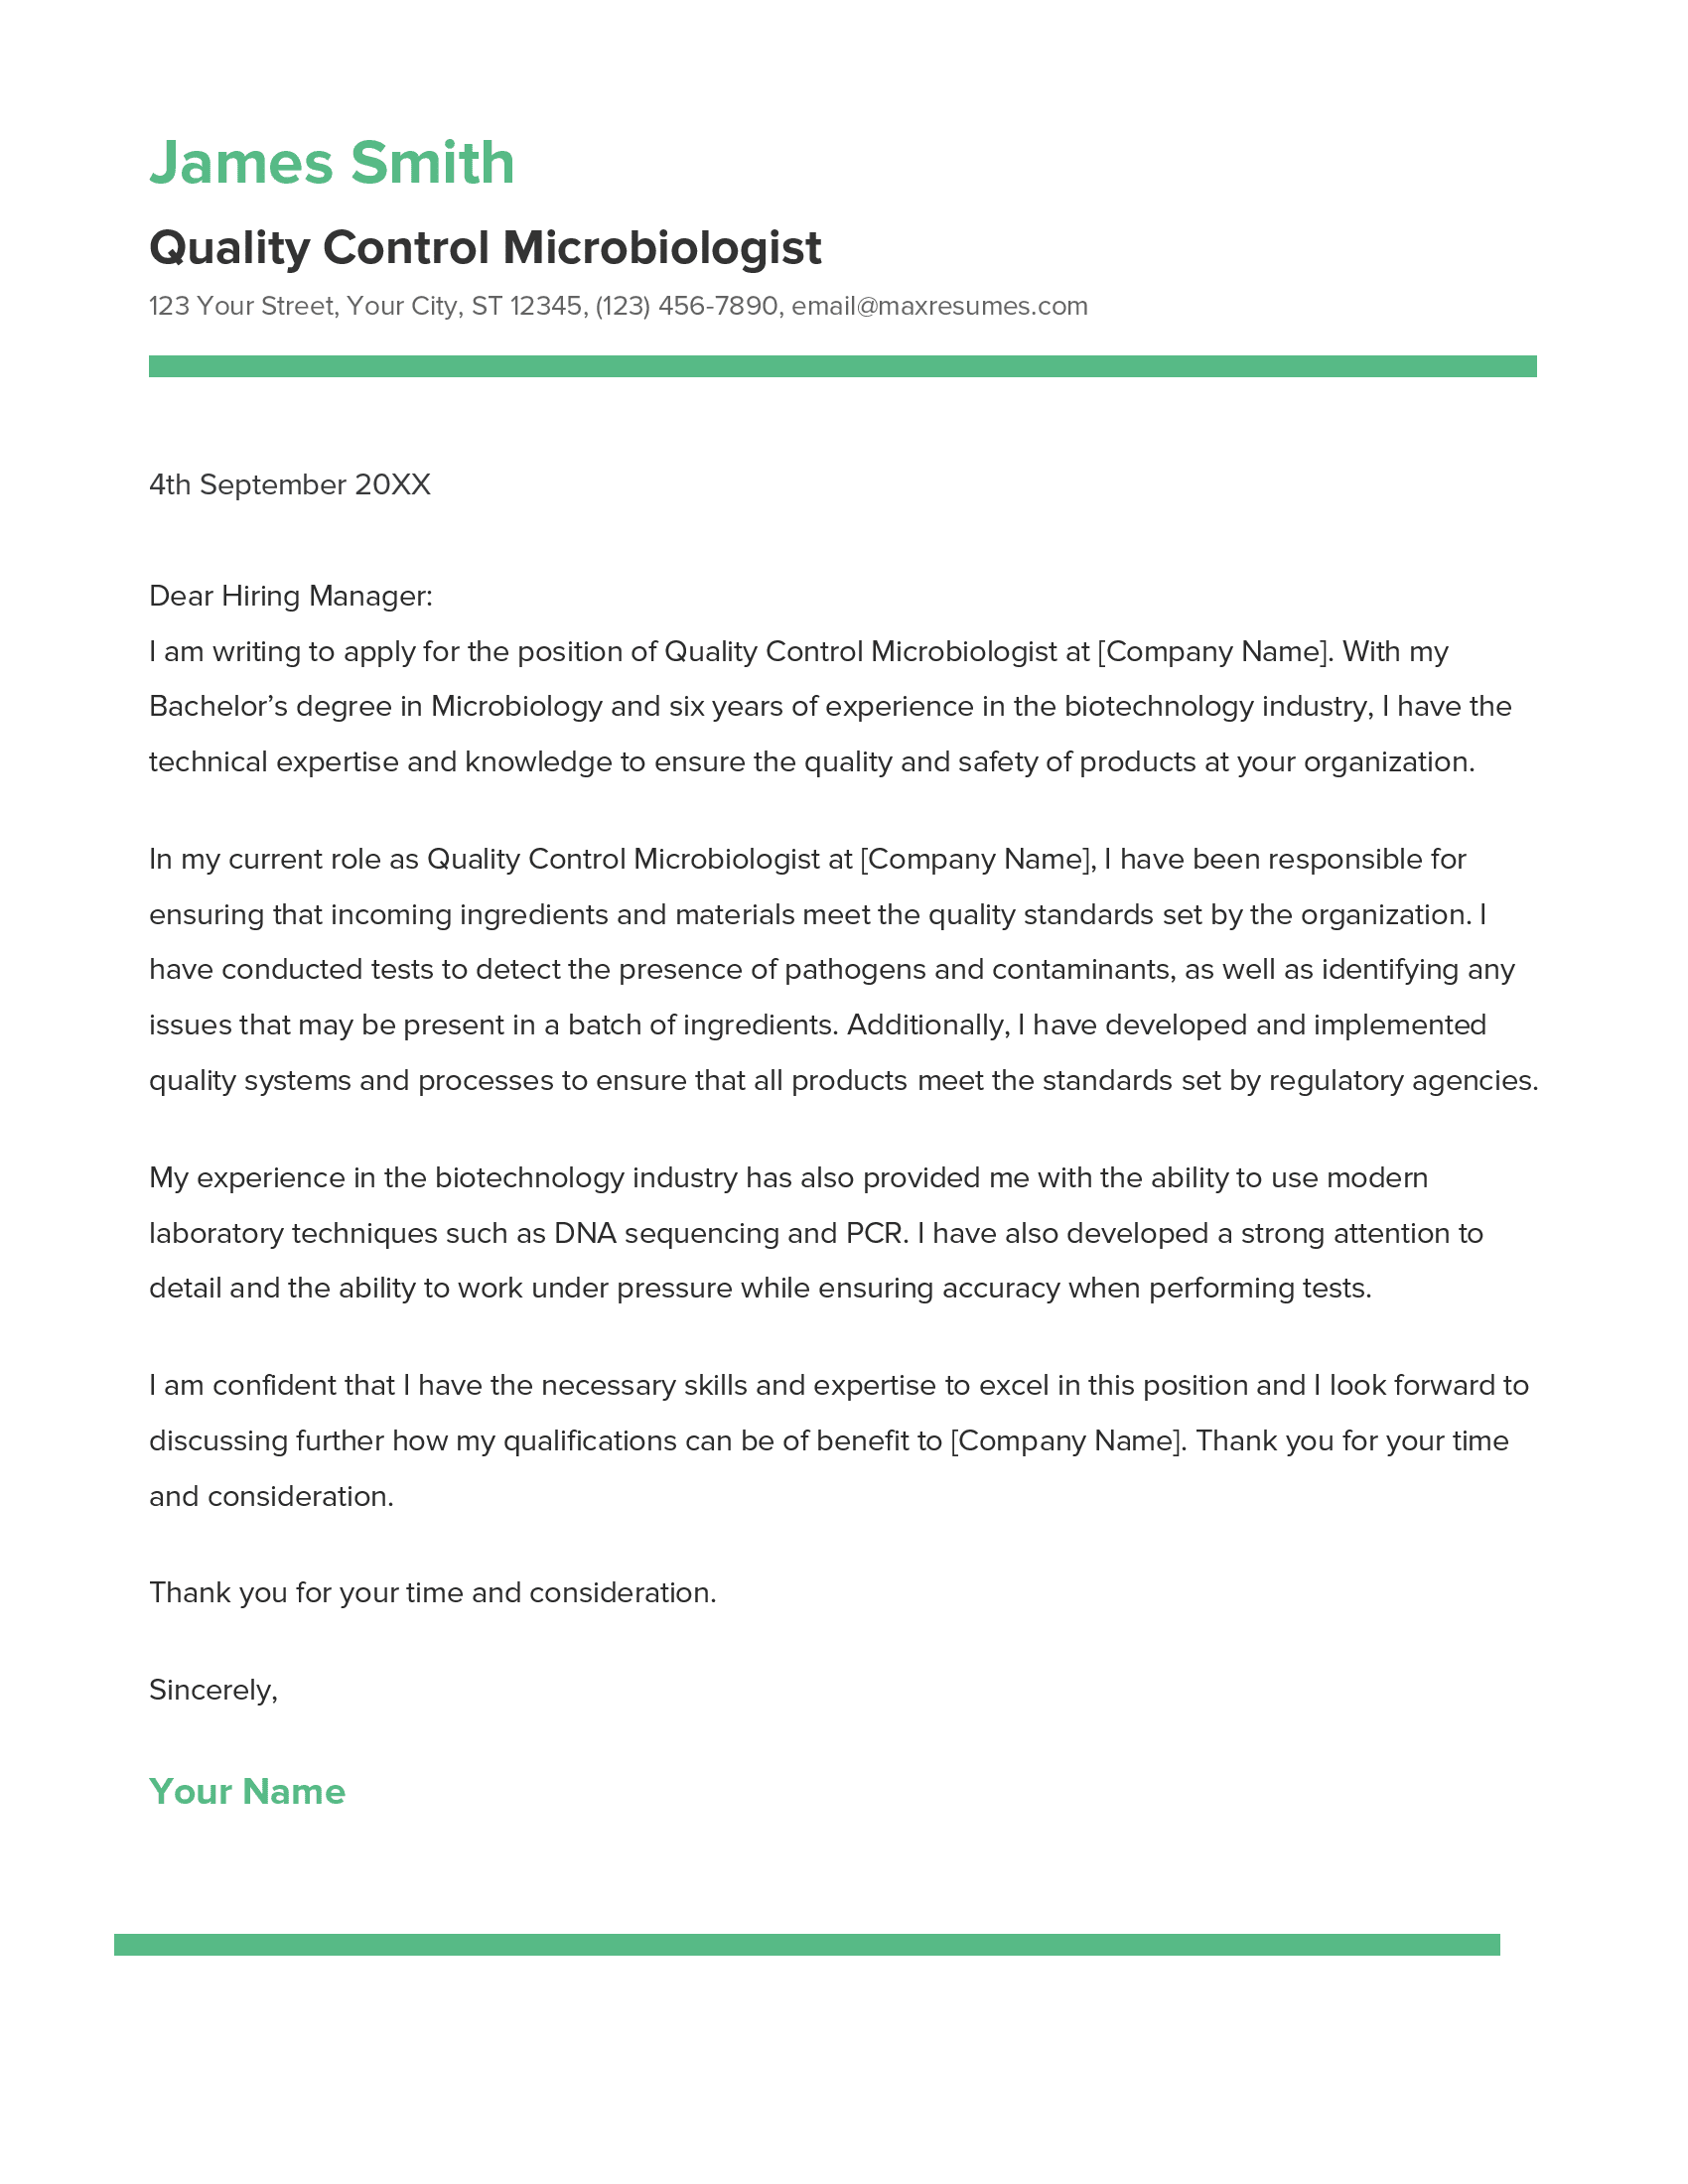 Quality Control Microbiologist Cover Letter Example